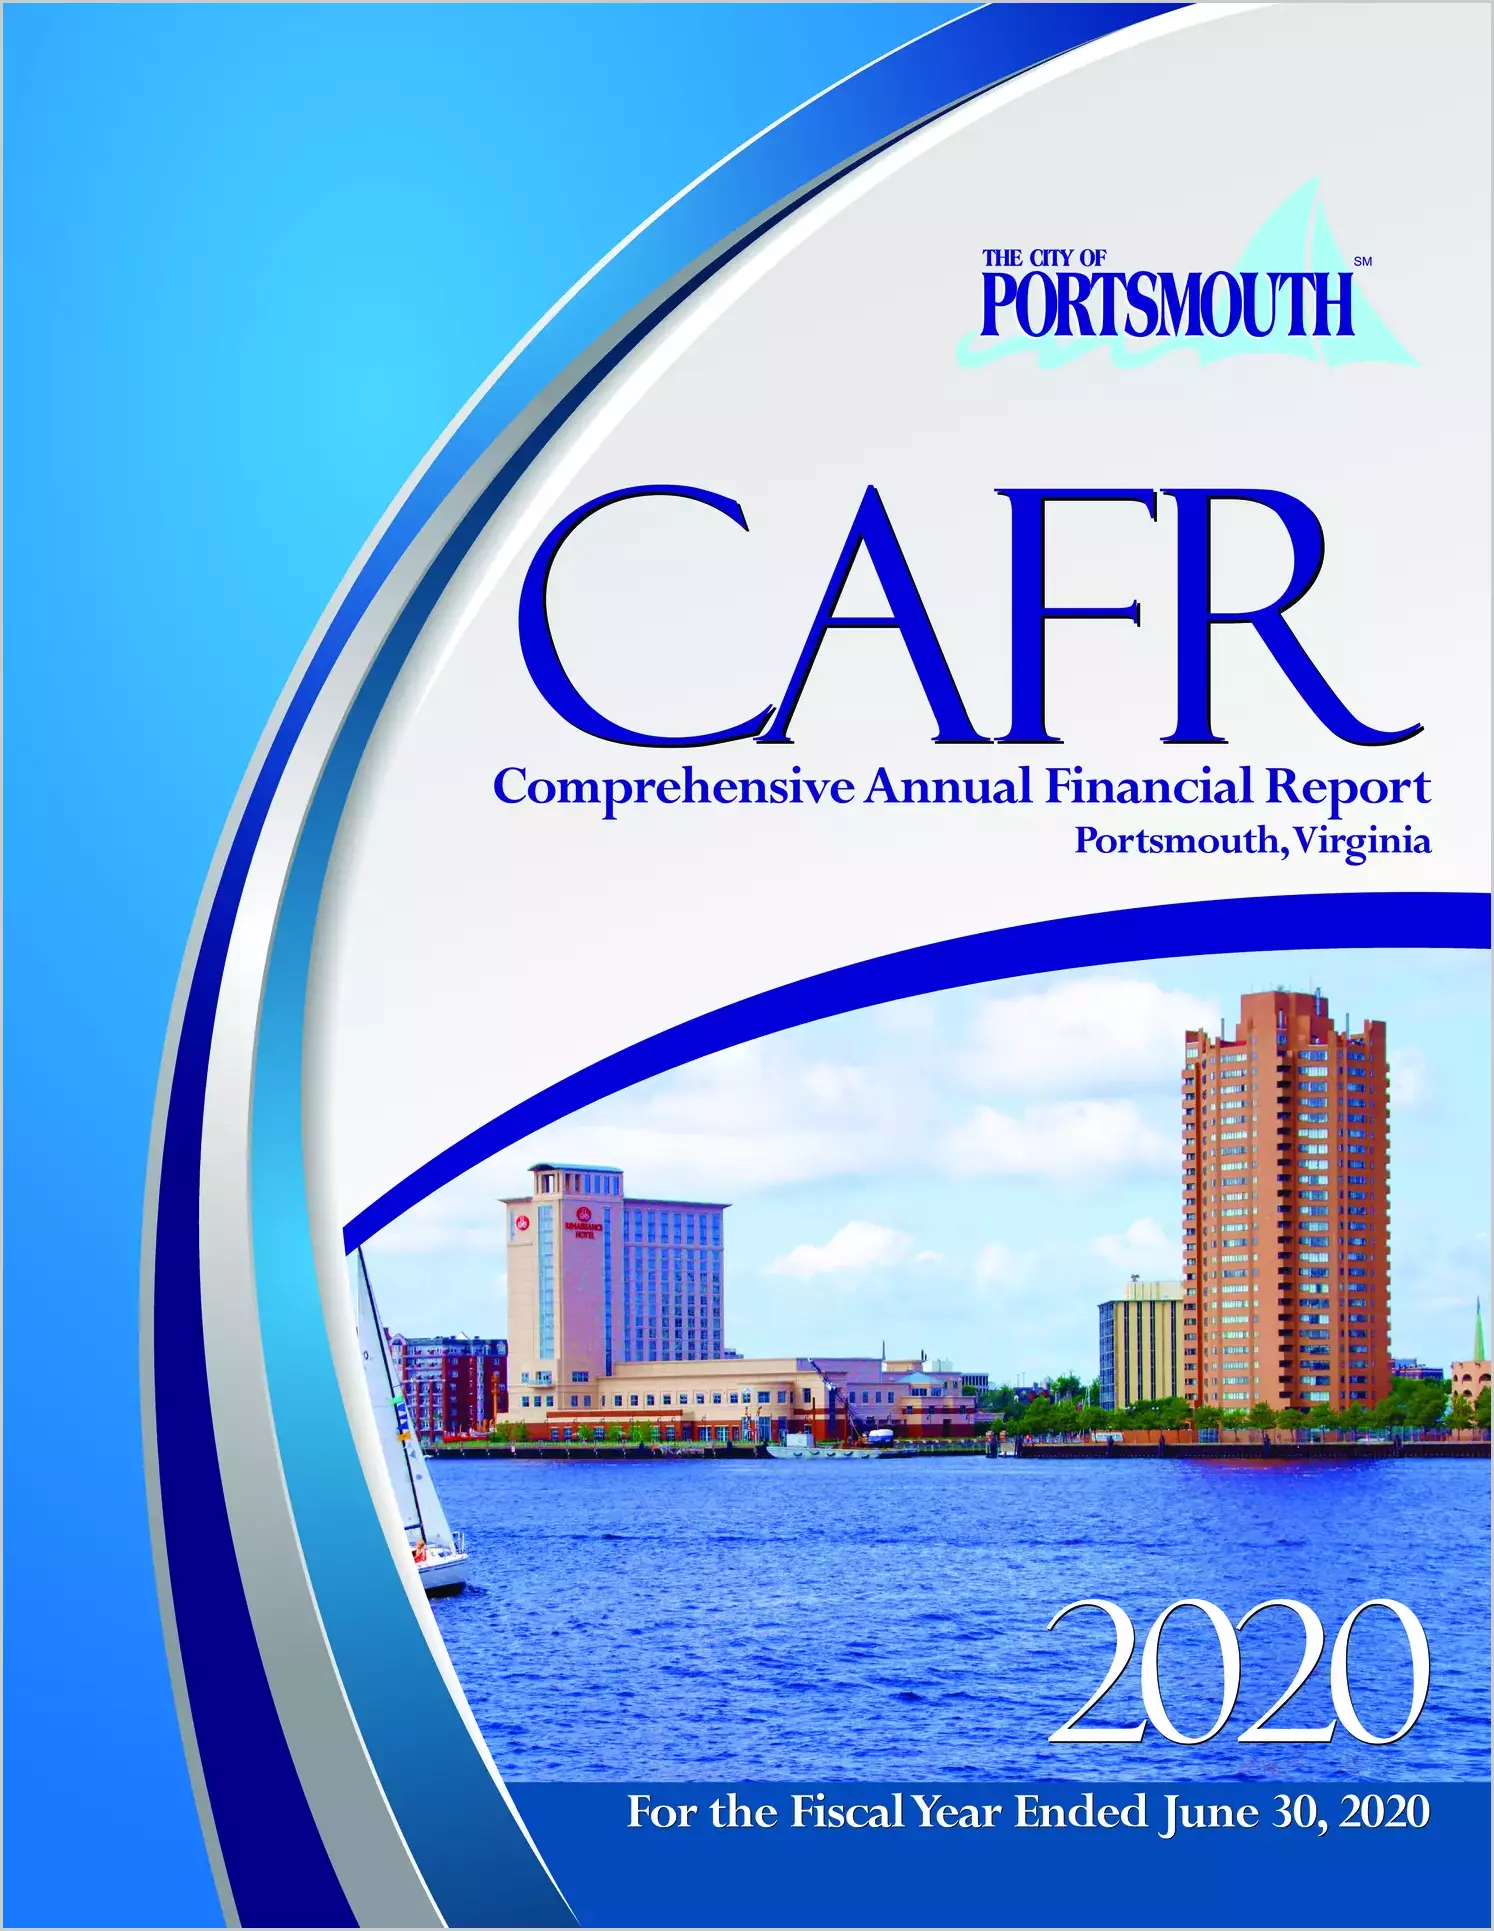 2020 Annual Financial Report for City of Portsmouth